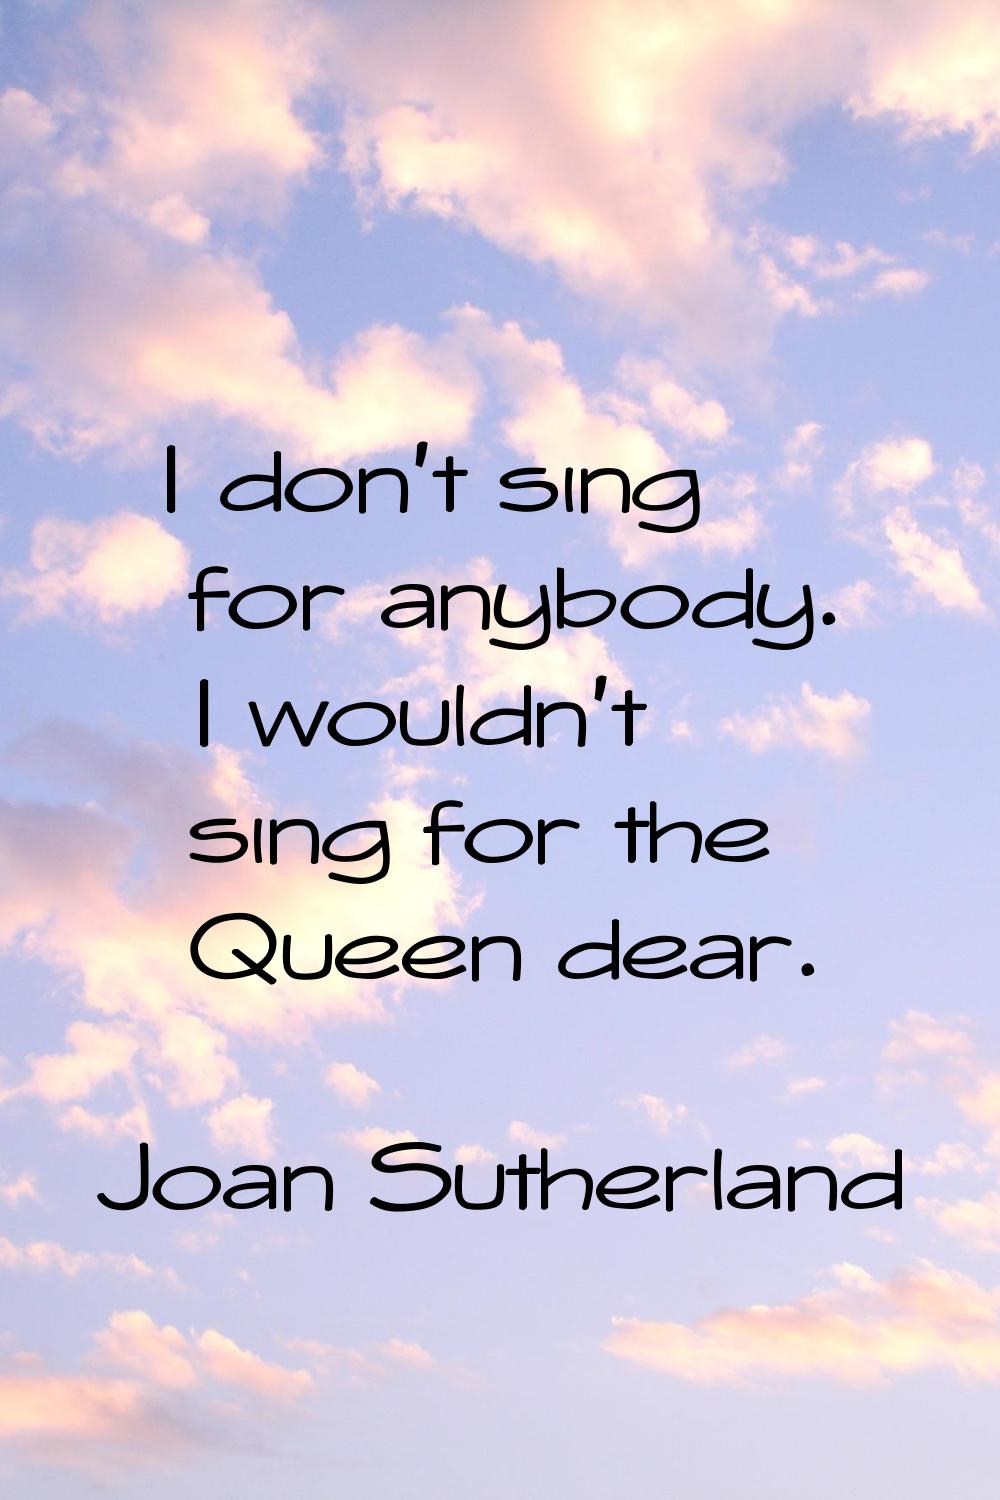 I don't sing for anybody. I wouldn't sing for the Queen dear.